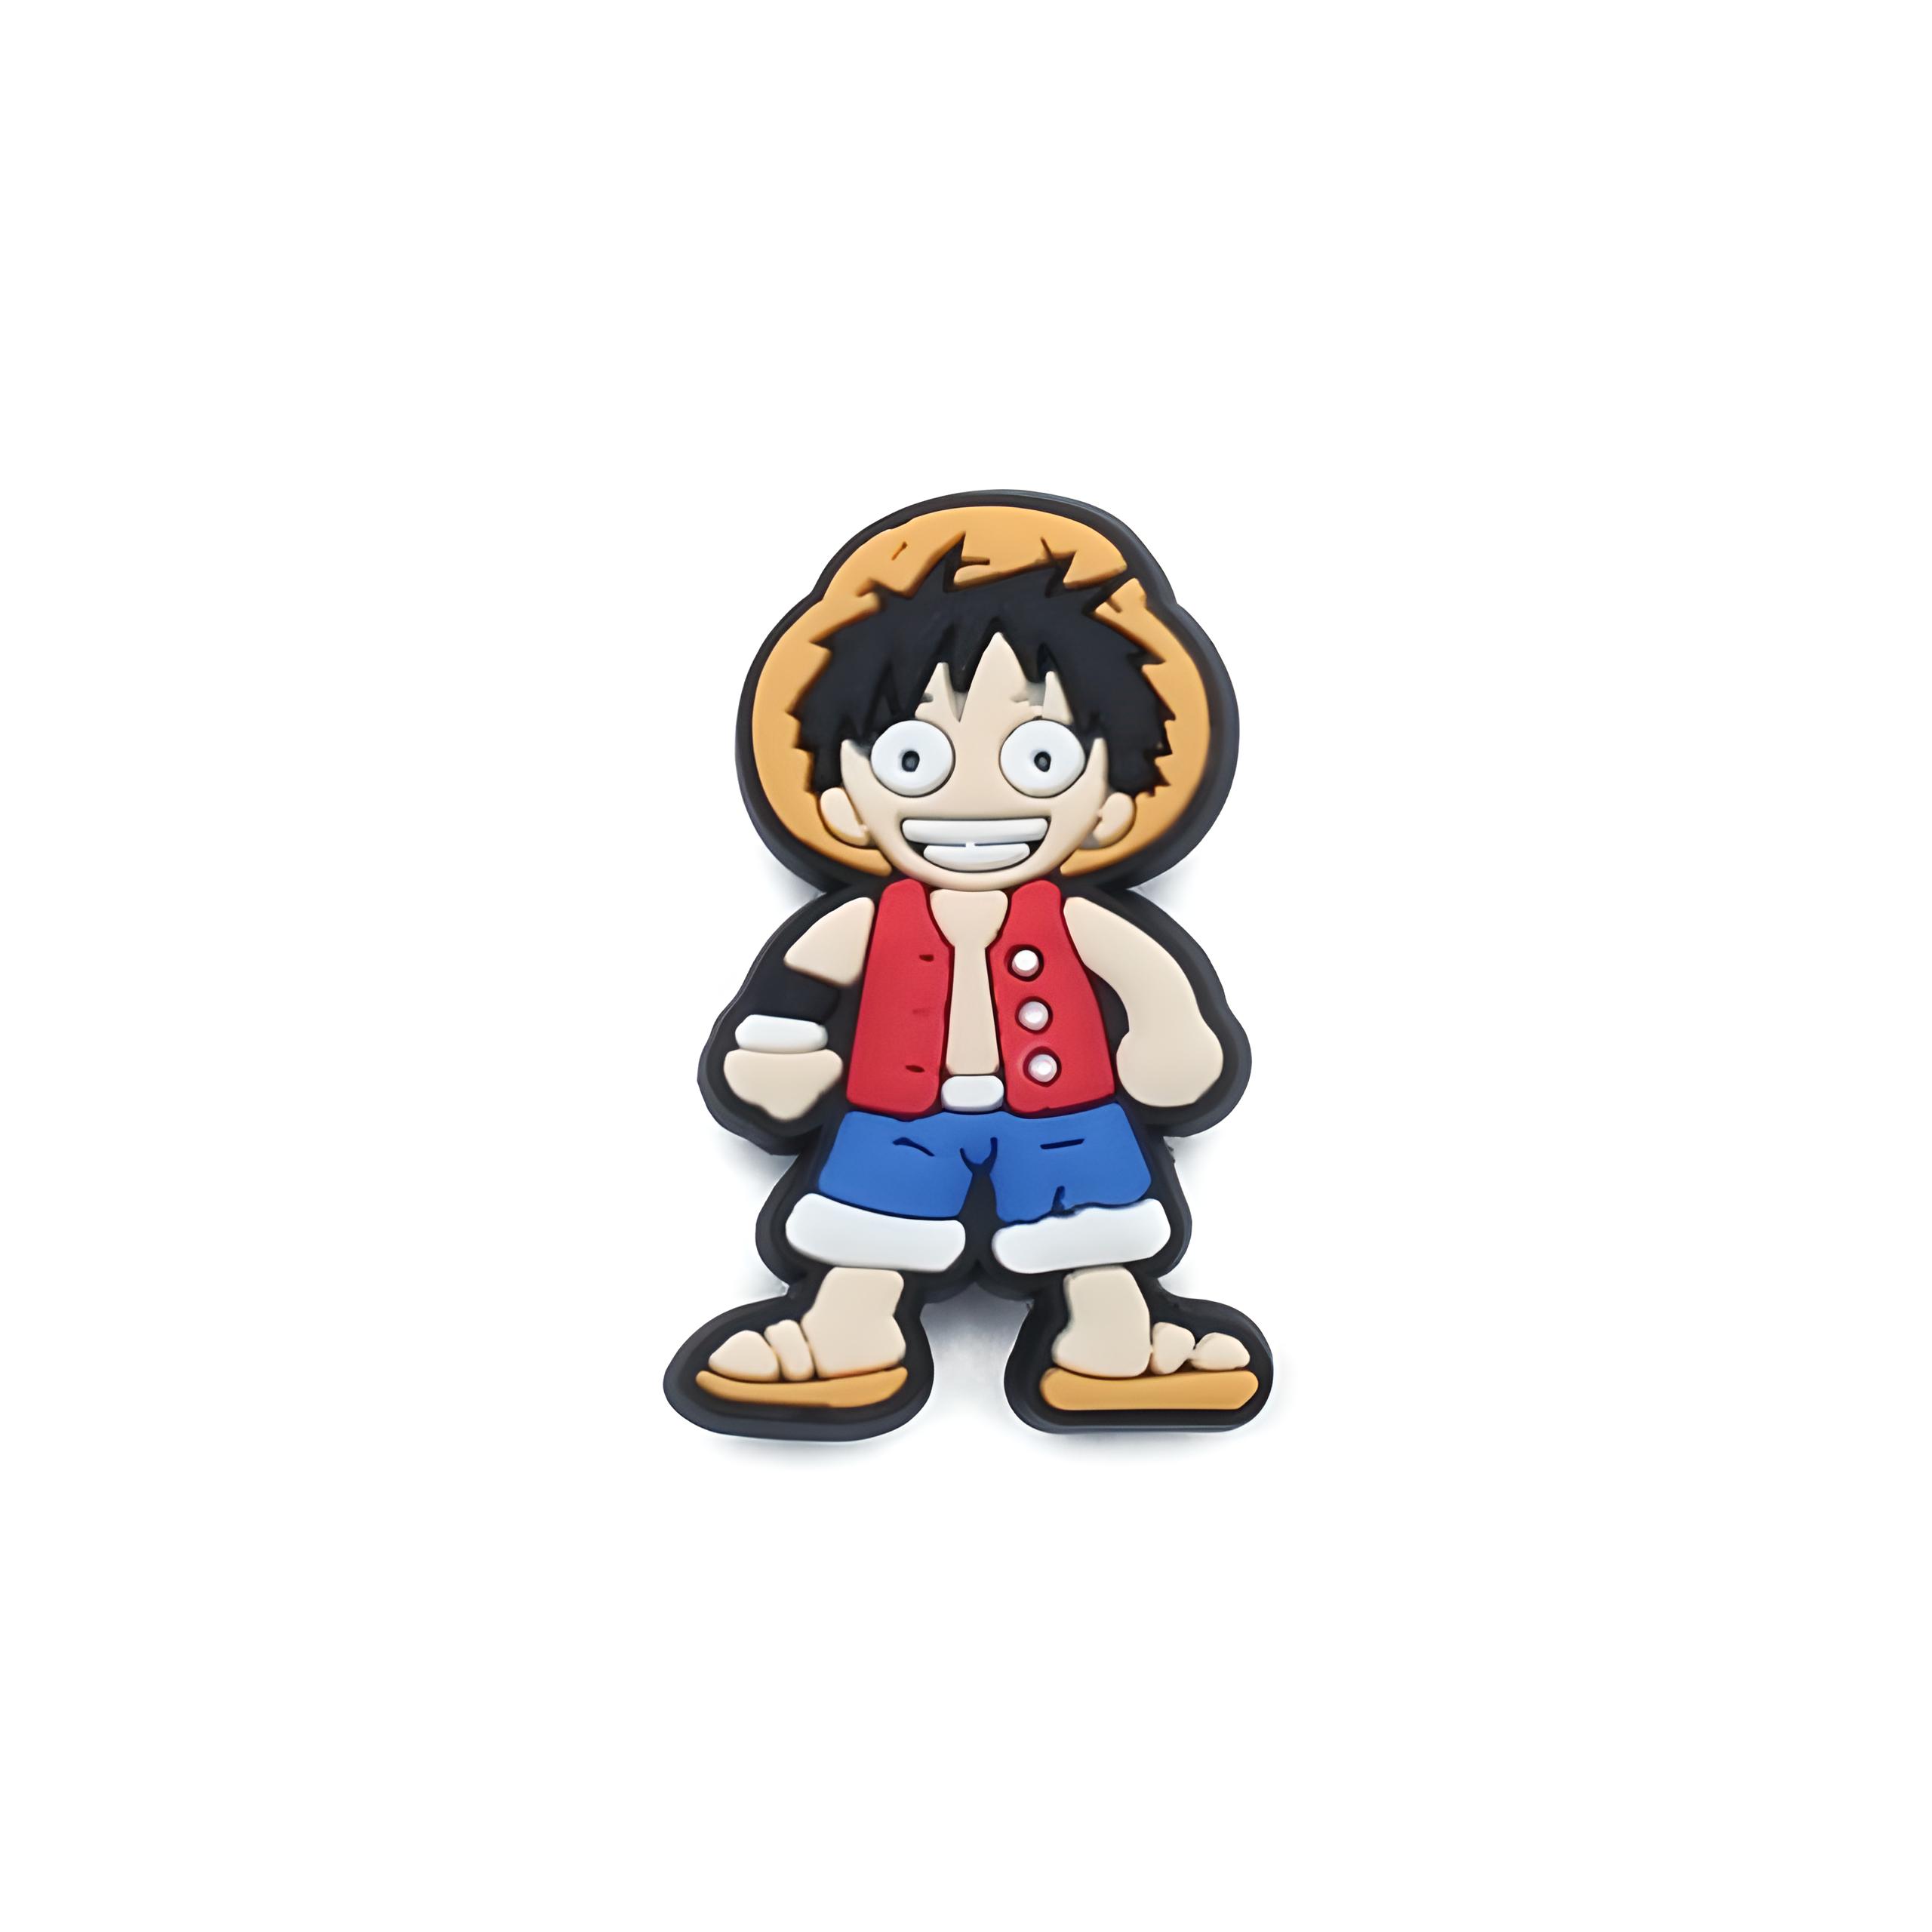 For more One Piece products, please visit the Crocs charm store